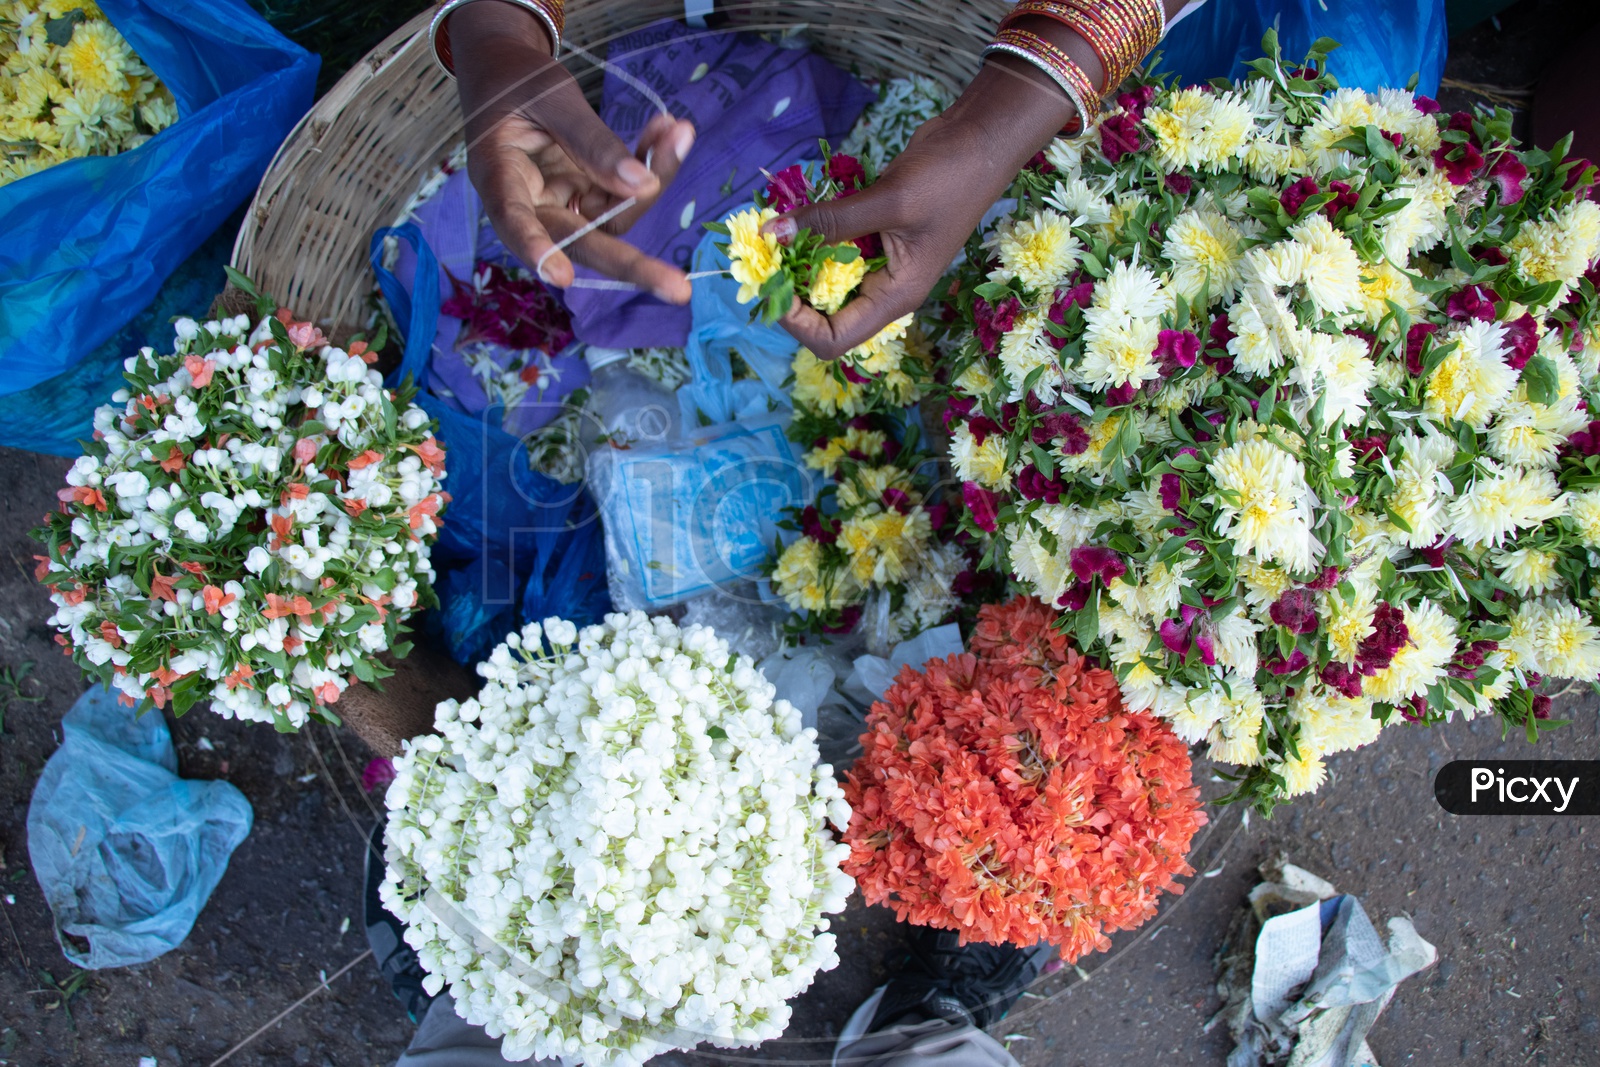 A Woman Flower Vendor Making Garlands With Flowers And Thread At a Flower Market